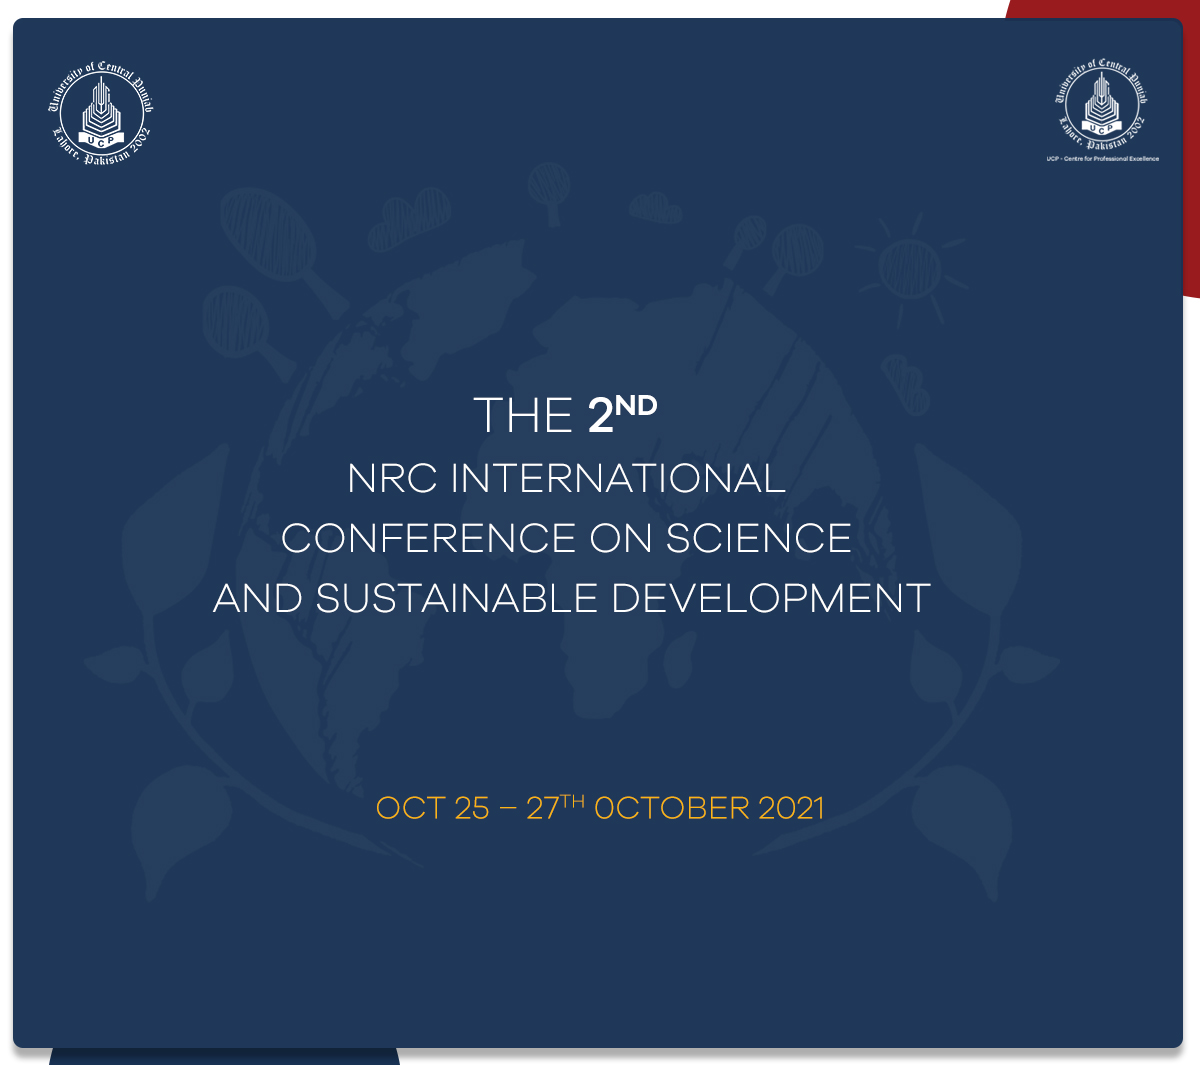 The 2nd NRC International Conference on Science and Sustainable Development